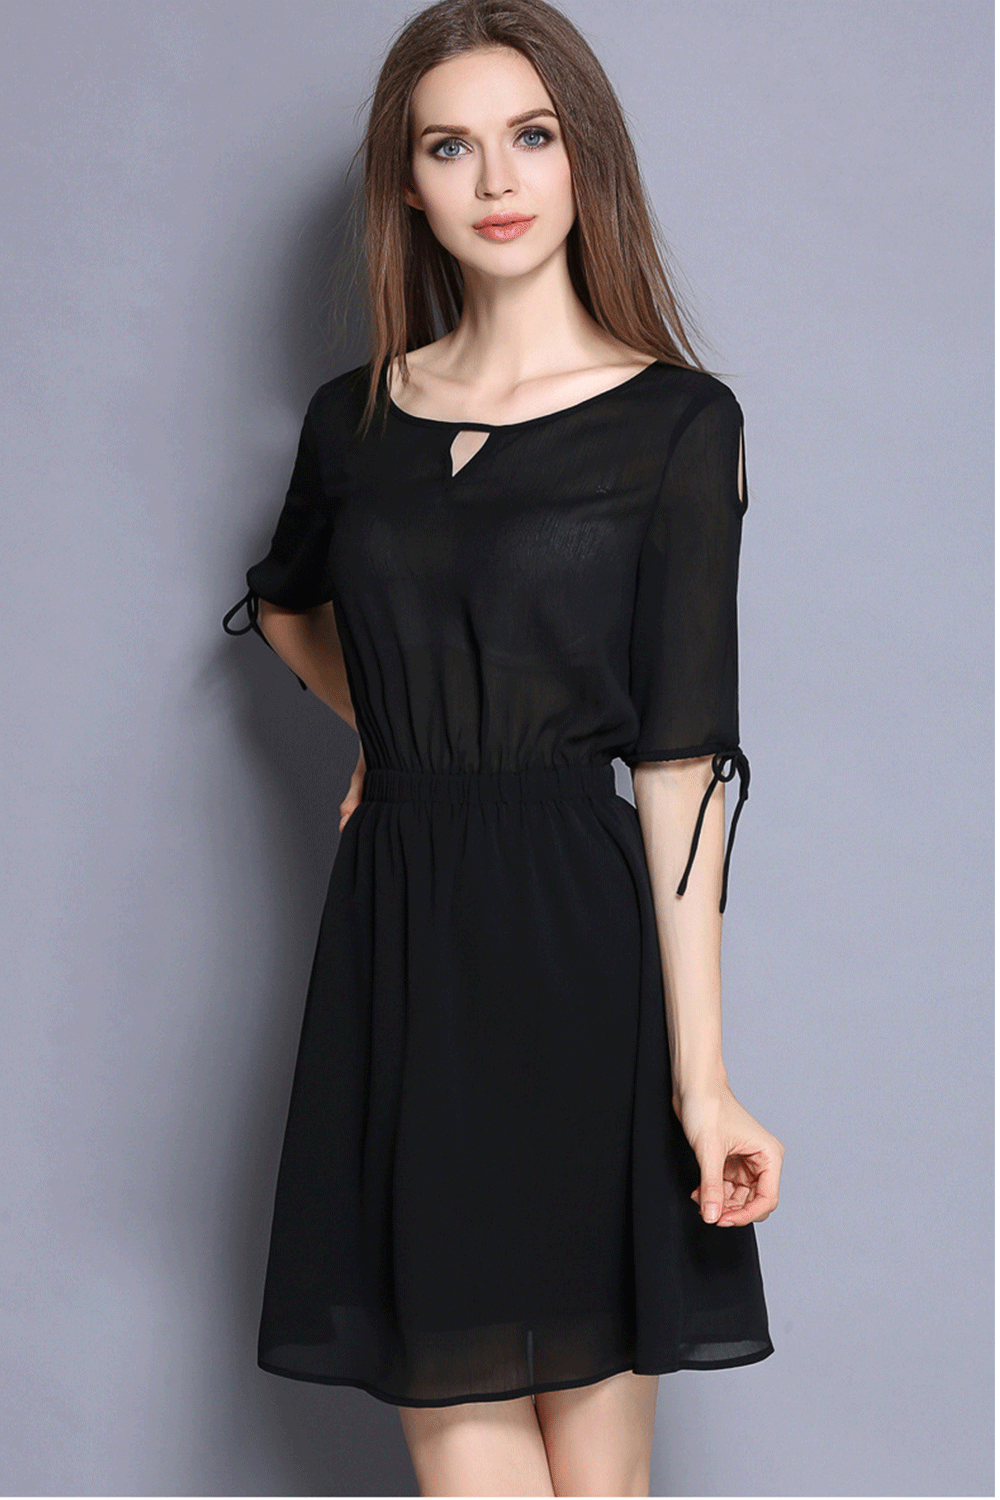 Ketty More Women Chic Solid Color Keyhole Neck Tie Sleeve Dress-KMWD438